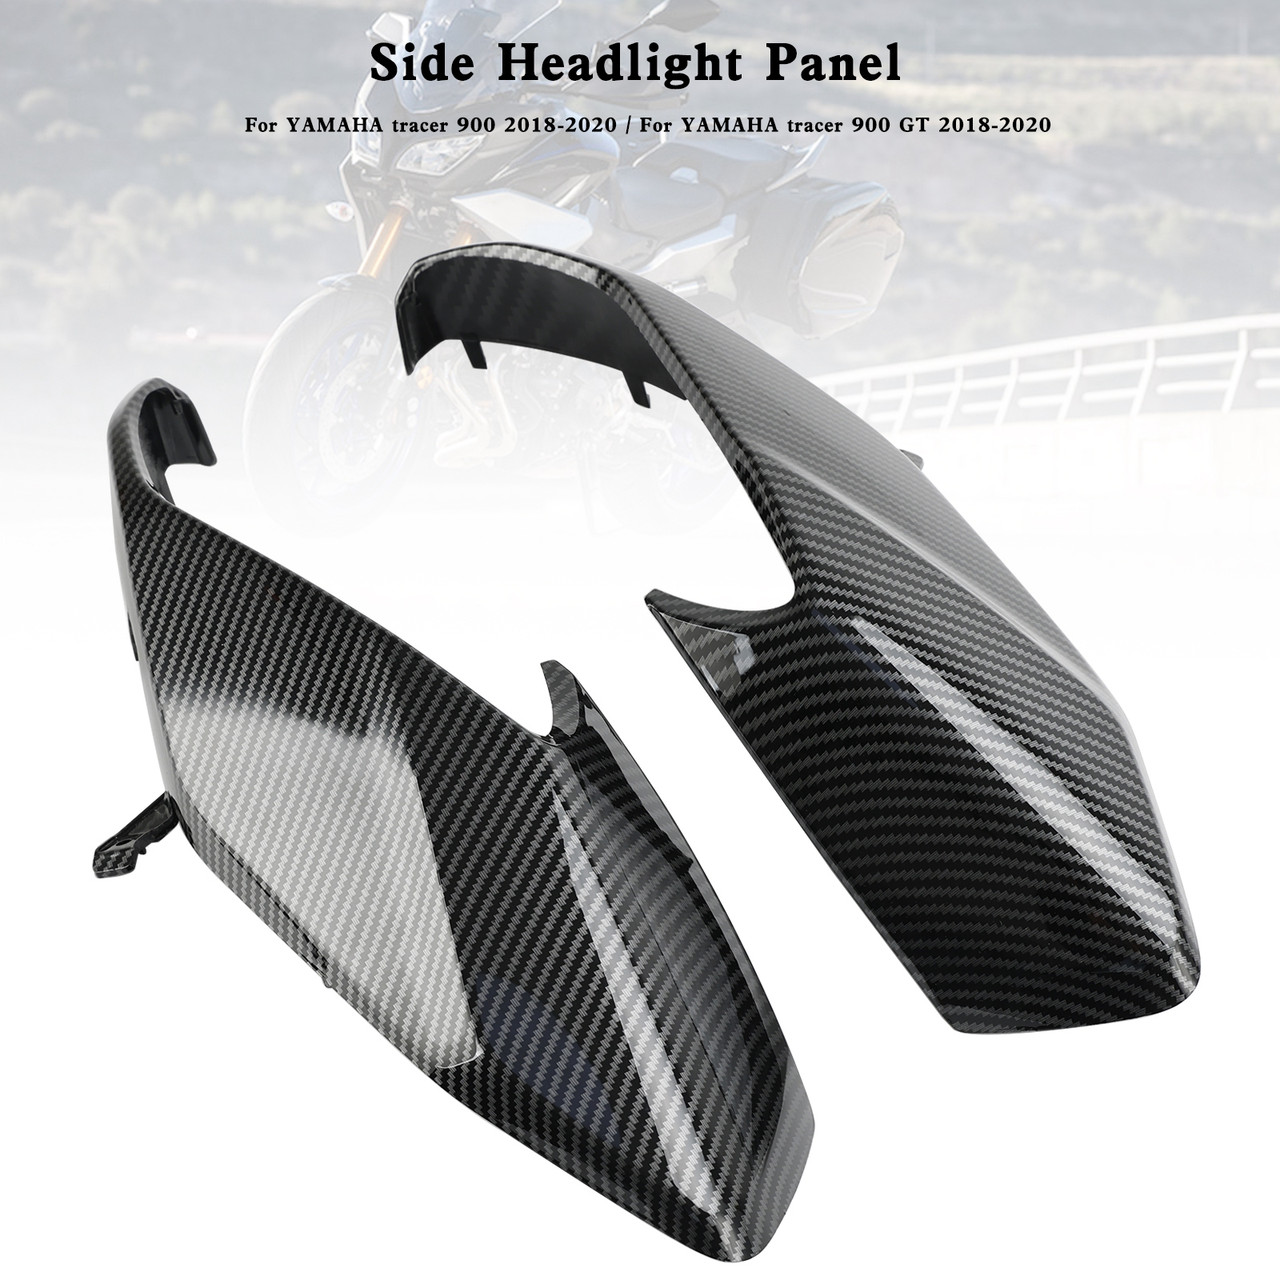 Carbon Front Side Headlight Panel For Yamaha Tracer 900 / GT 2018-2020